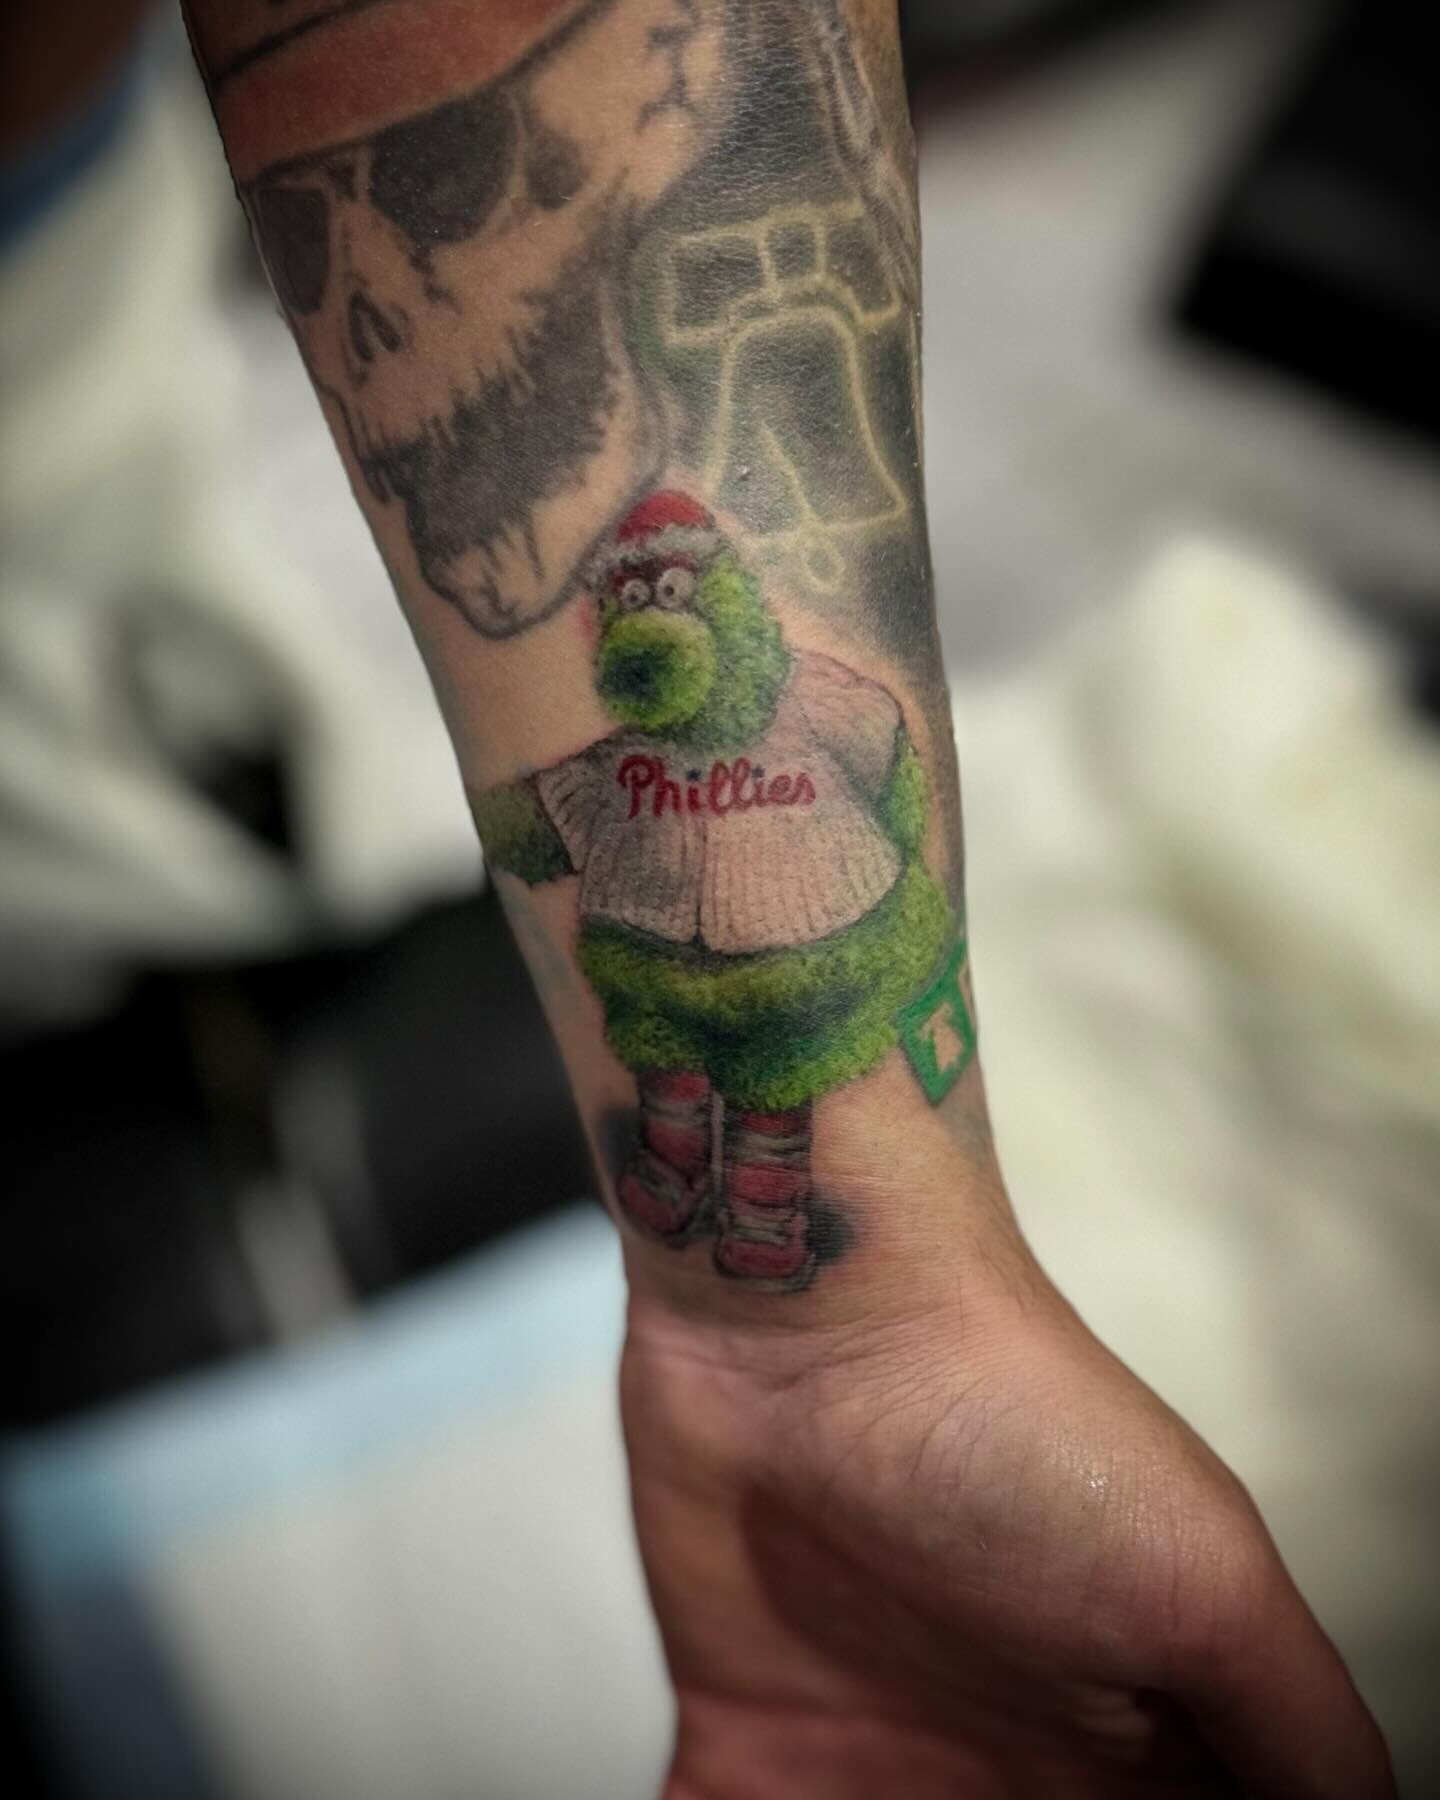 here&rsquo;s a lil #phanatic I made ✨ part of a #philly #halfsleeve ➡️ click the ⛓️BOOK NOW⛓️ button on my page to schedule your next #tattoo ✨
.
.
.
.
.
.
.
#tattoo #tattoosofinstagram #southjerseytattooartist @jerseydeviltattooshop